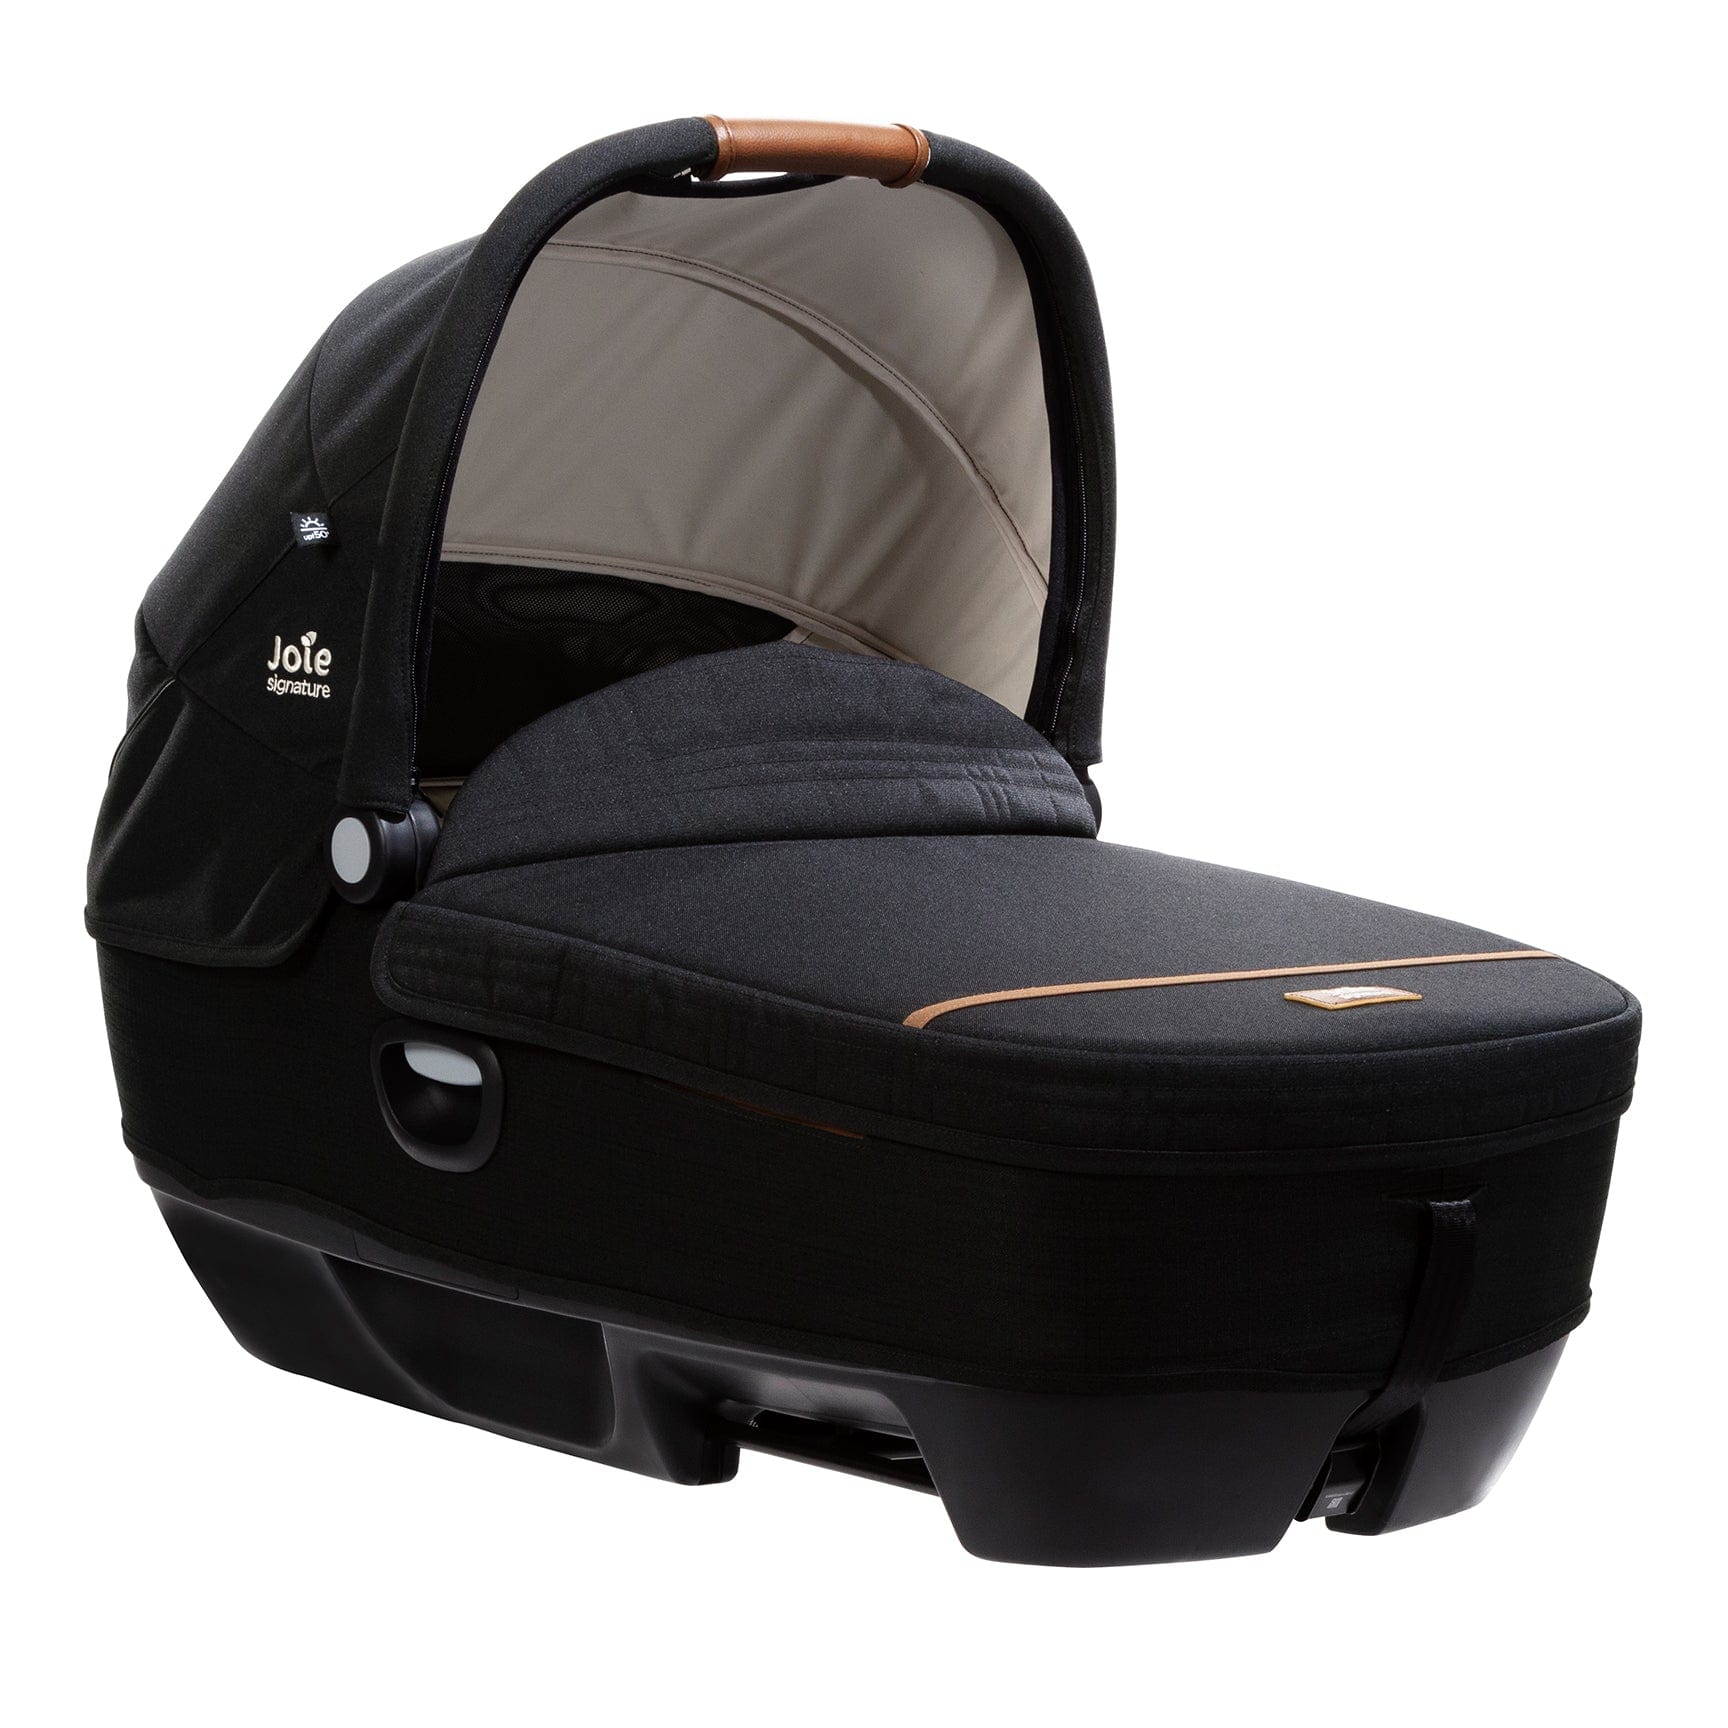 Joie Calmi Car Cot Bed & I-Base Encore in Eclipse 0-76 cm (Infant carriers) 12218-ECI 5056080612423